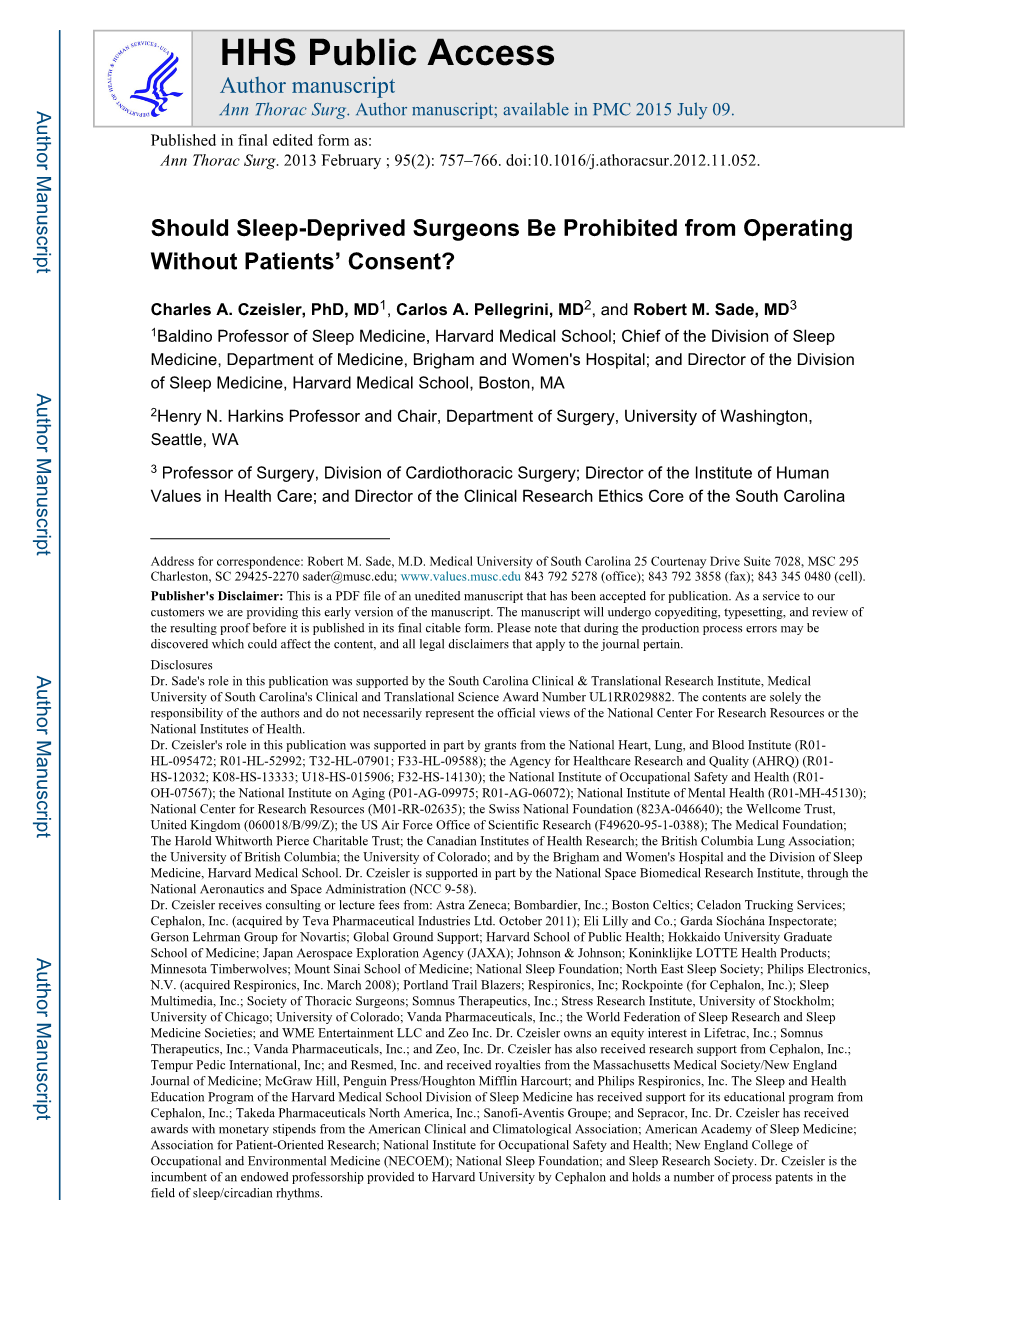 Should Sleep-Deprived Surgeons Be Prohibited from Operating Without Patients’ Consent?